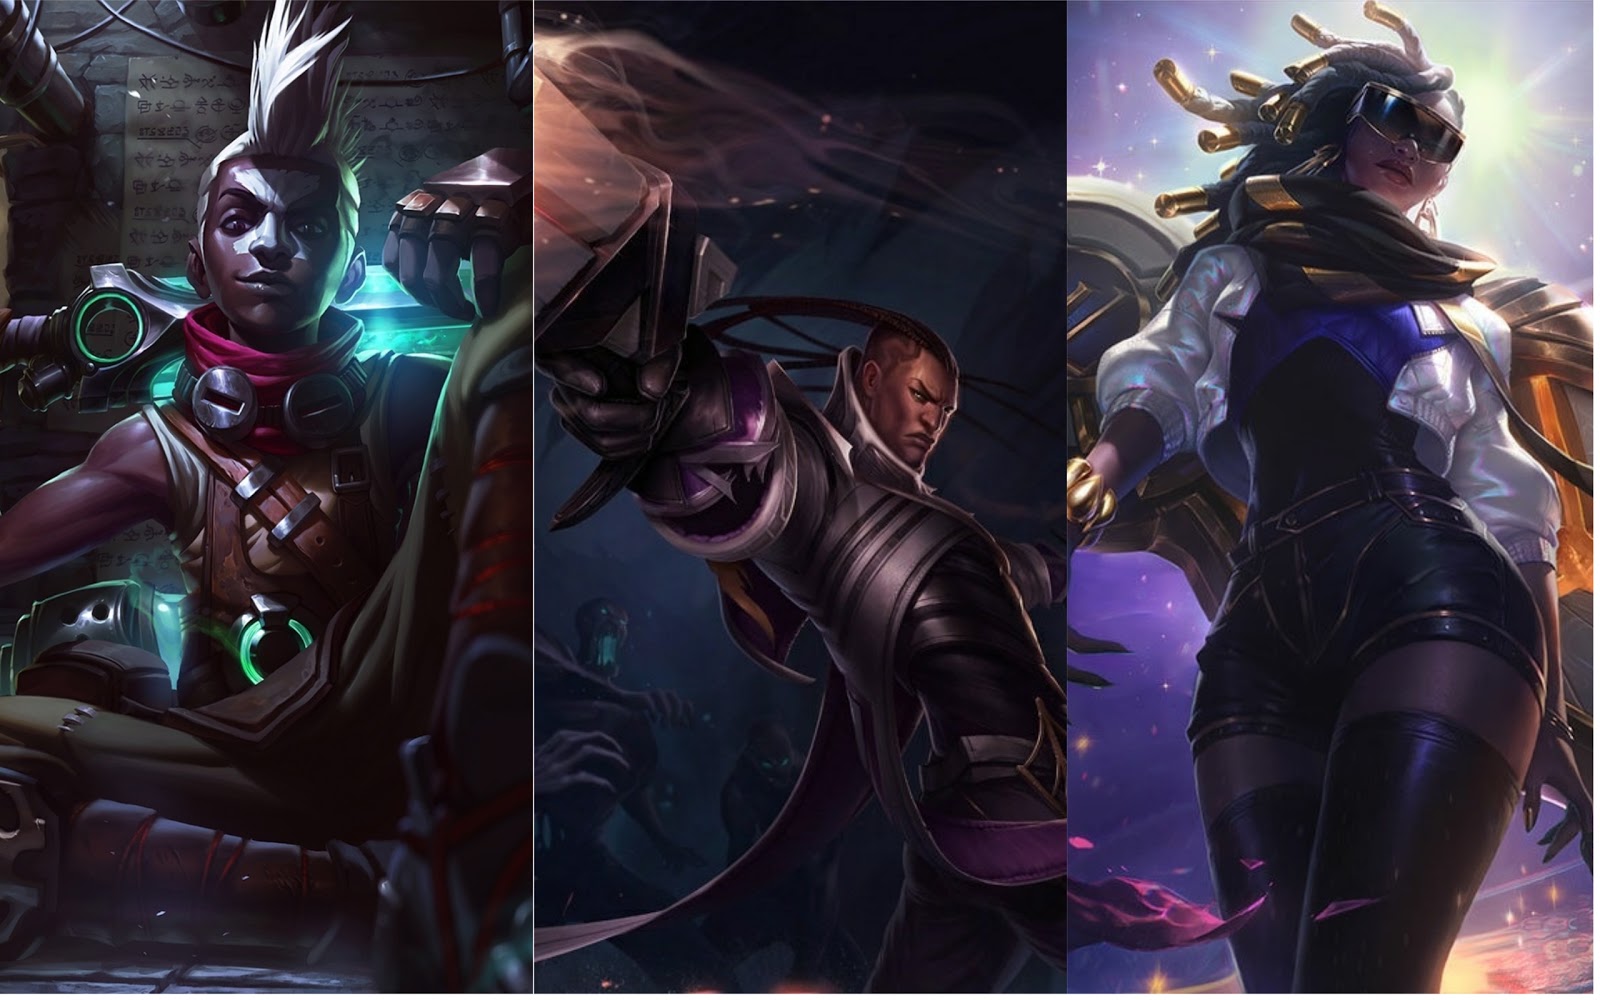 Get to Know League of Legends’ Black Champions: Ekko, Senna and Lucian